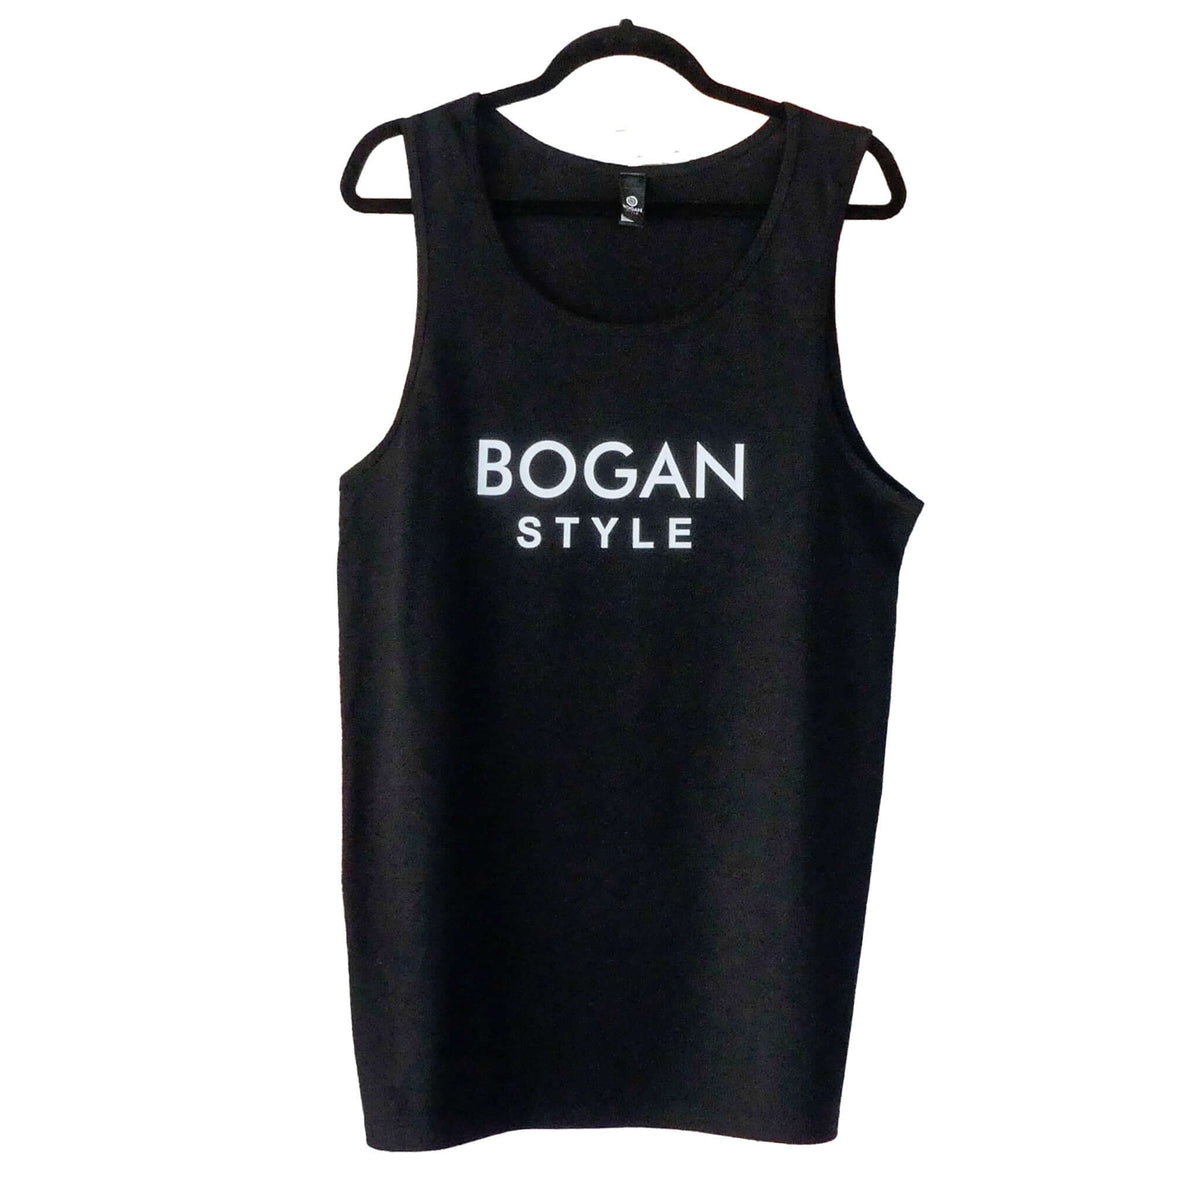 Black tank top on hanger with Bogan Style printed on the front